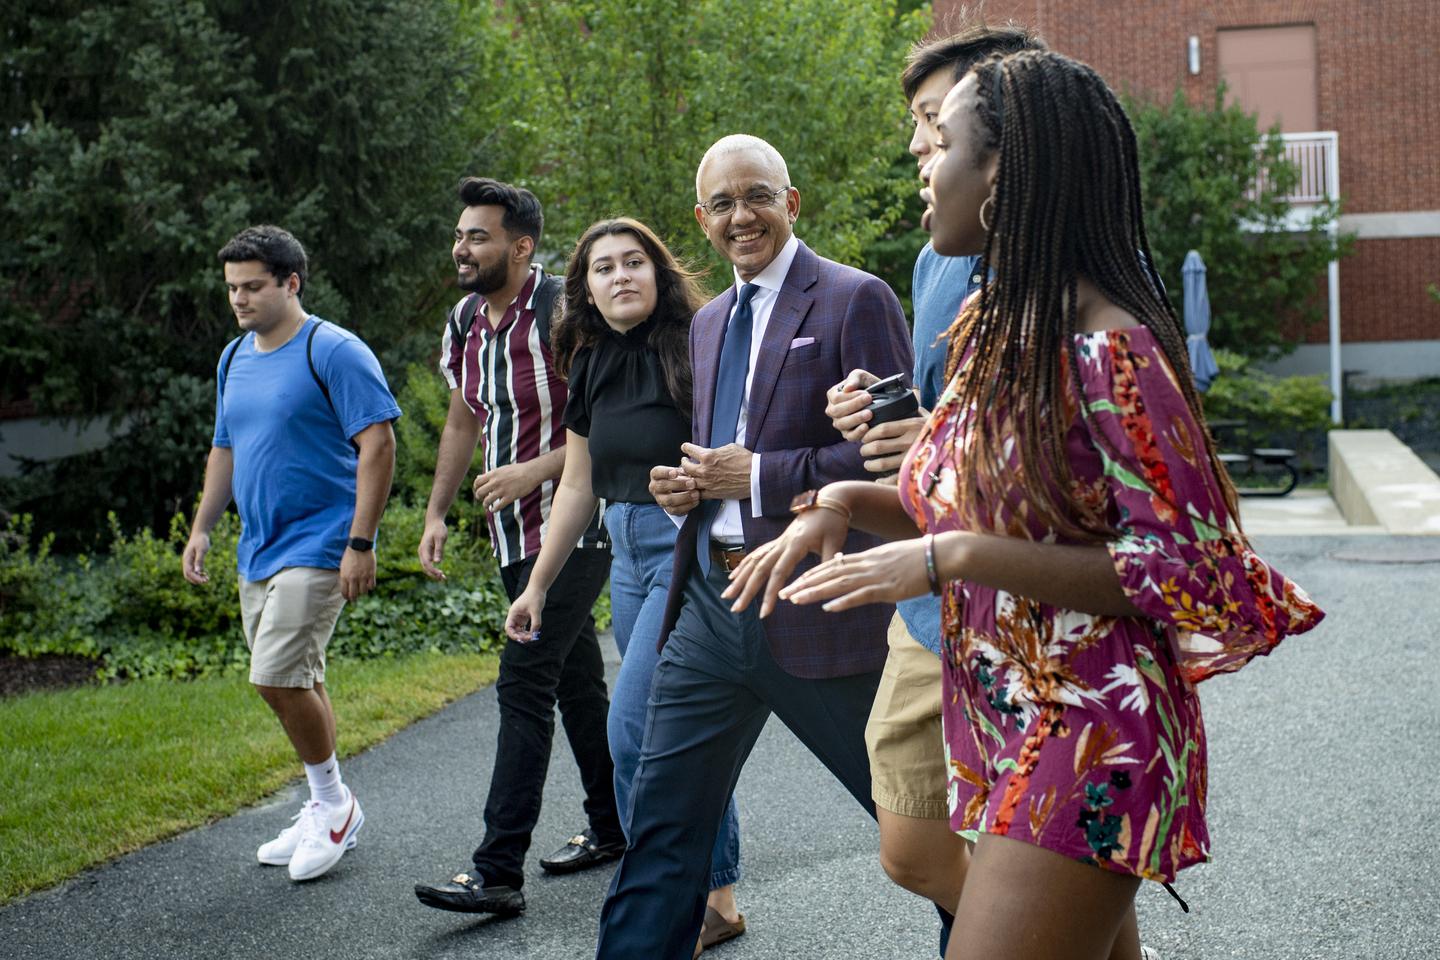 Bentley University President E. LaBrent Chrite walks with students